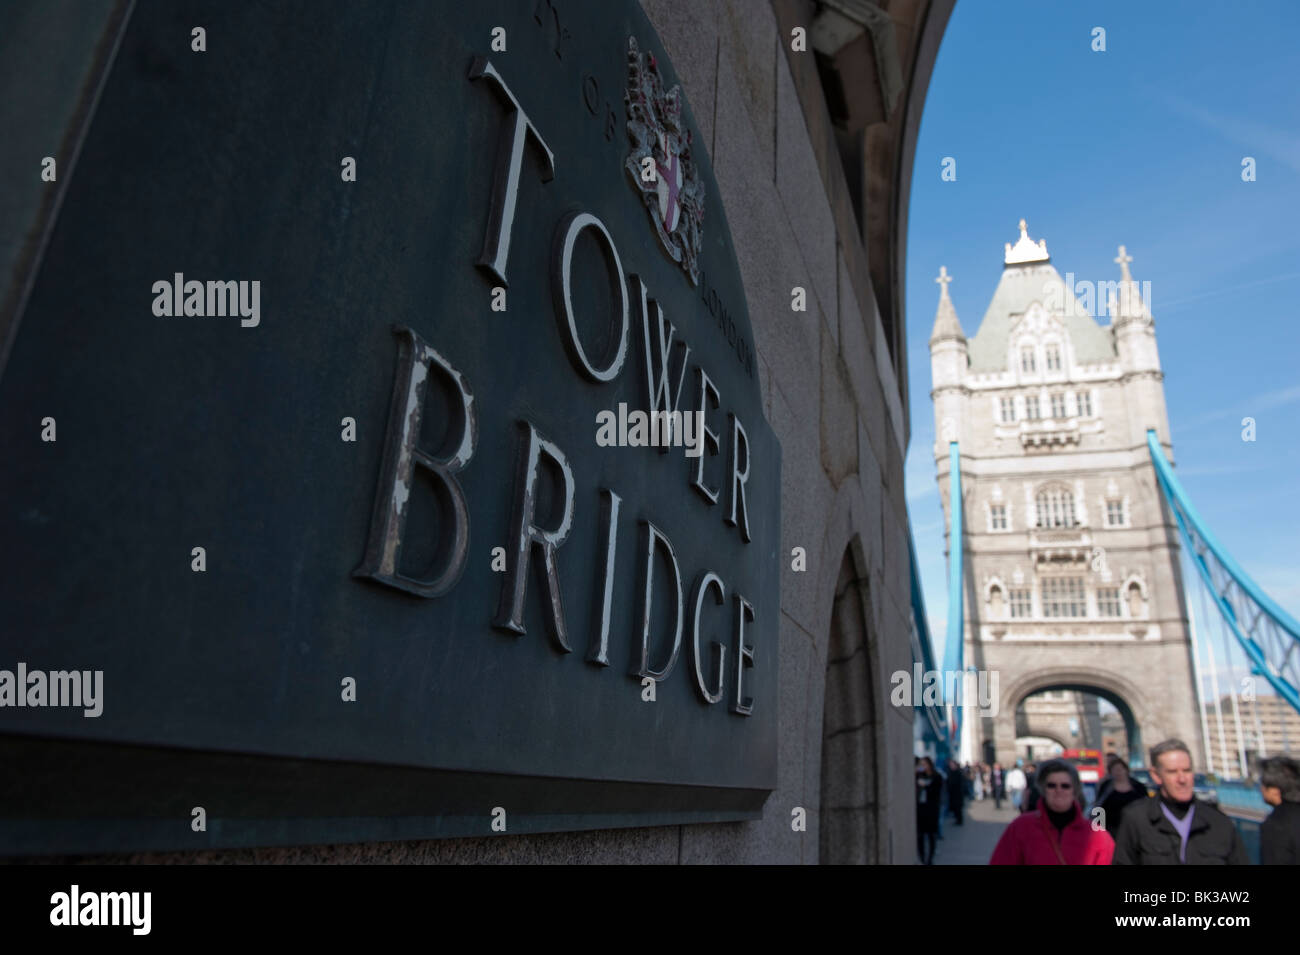 Tourists at the Tower Bridge of London. Stock Photo